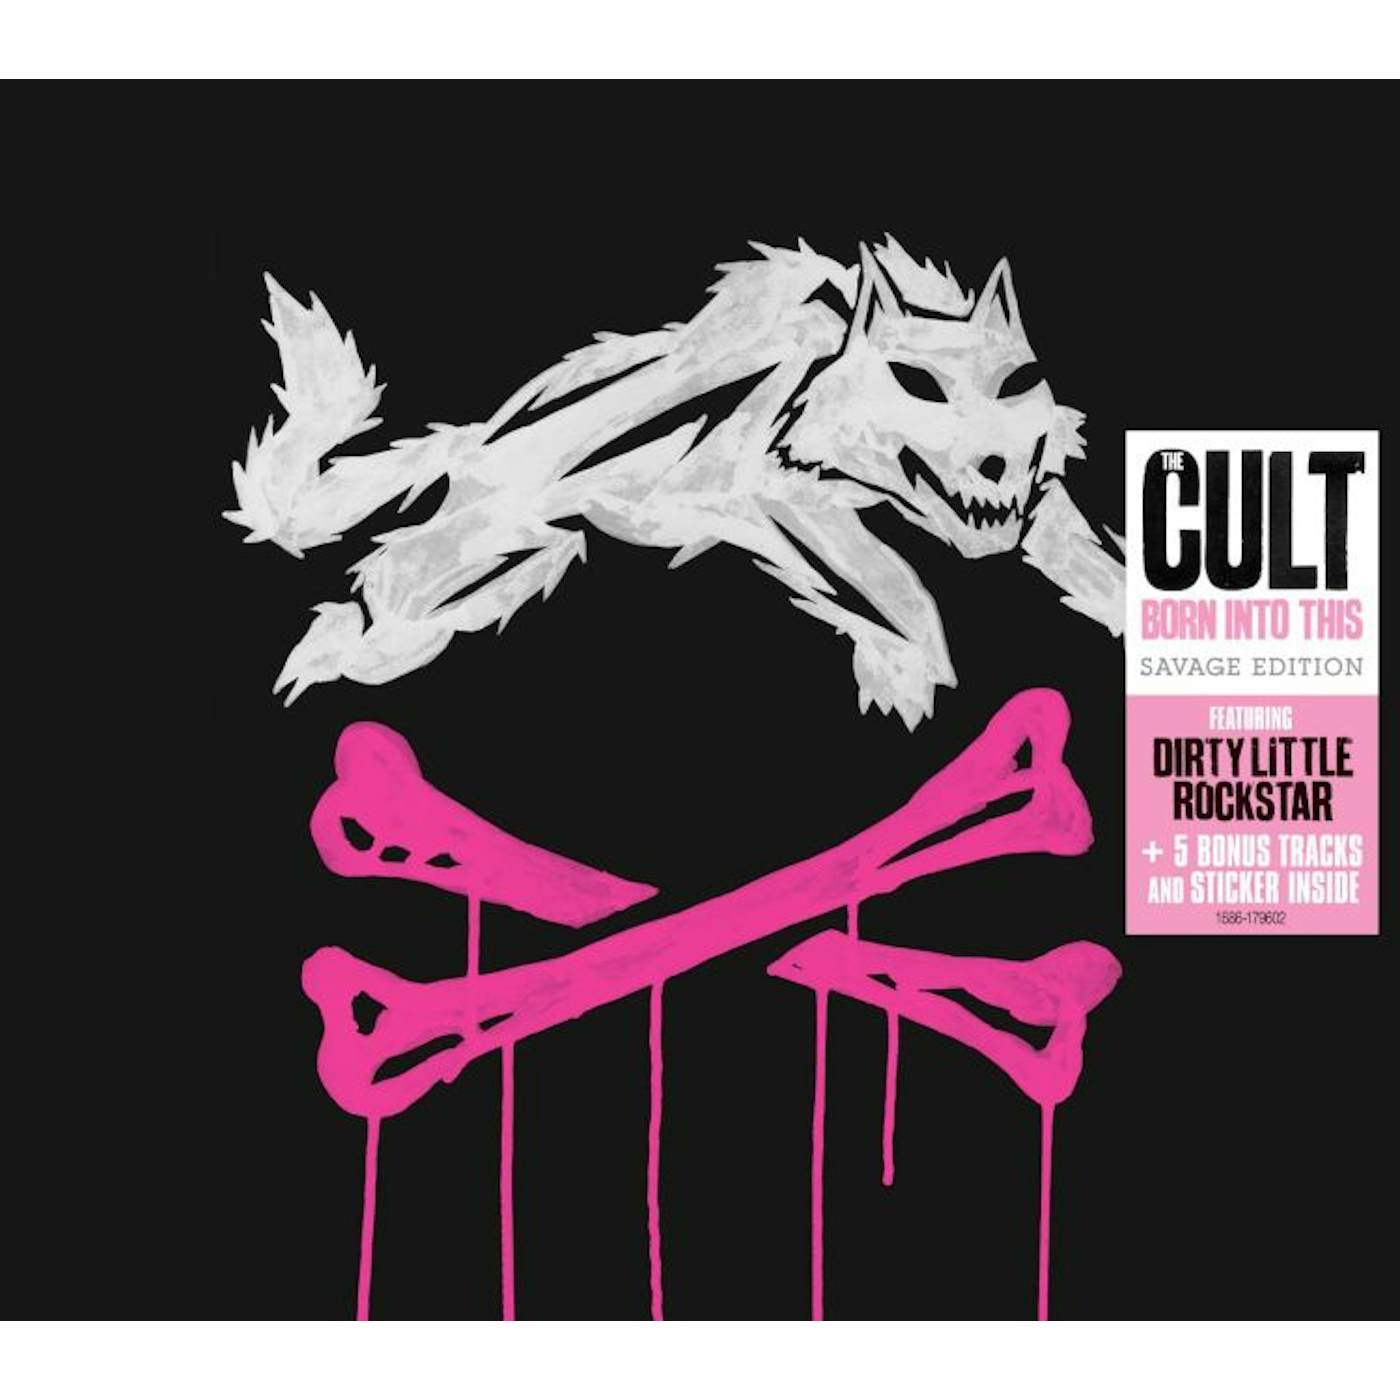 The Cult Born Into This Special/Savage Edition CD